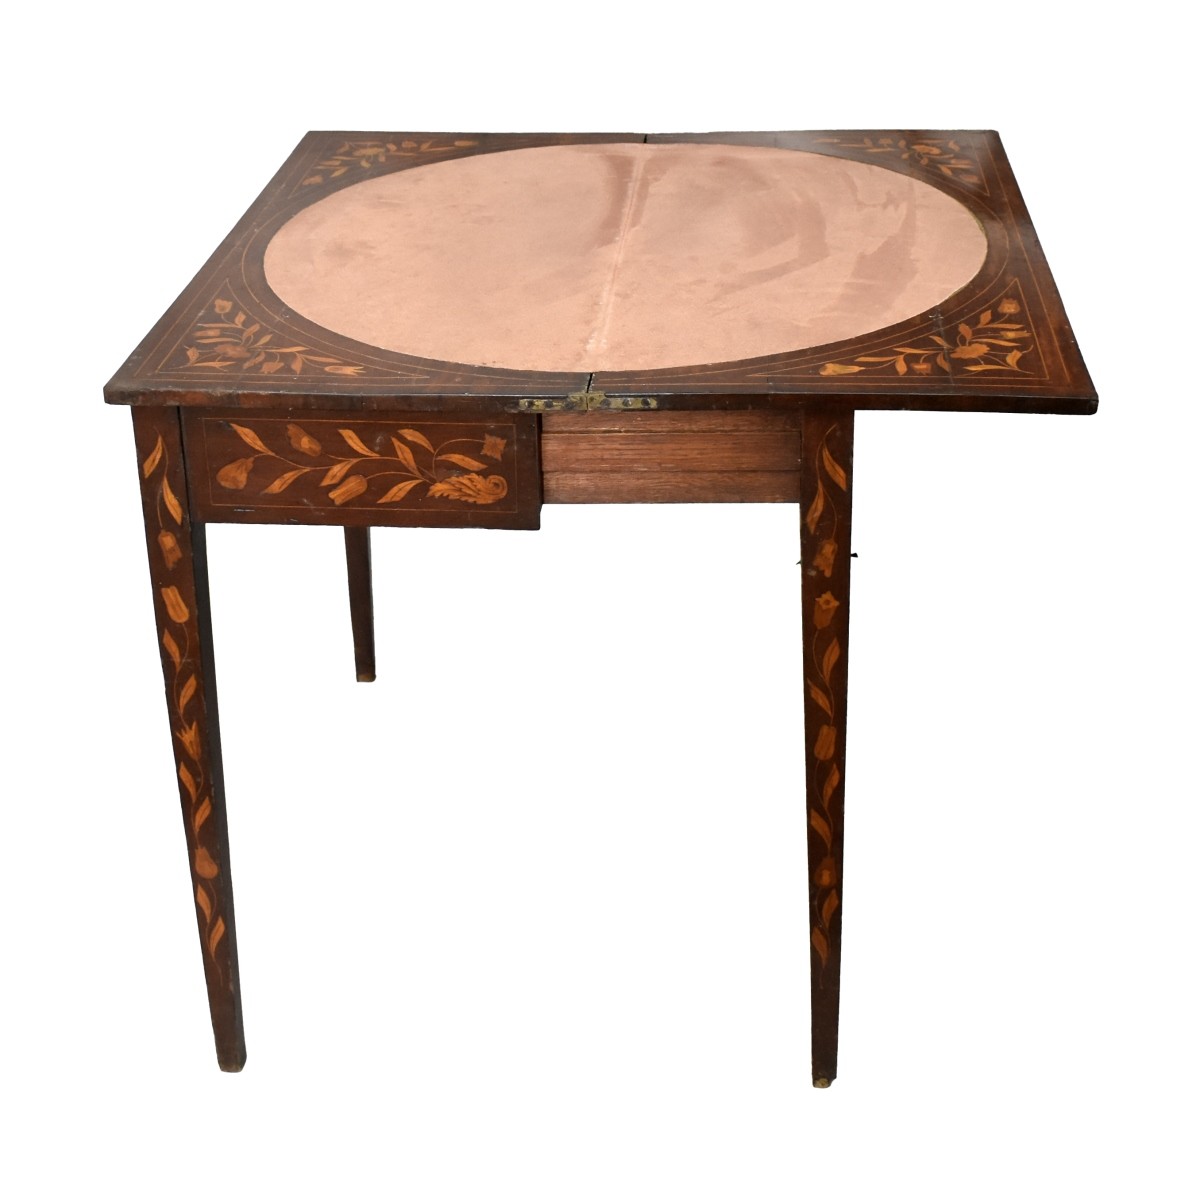 19th C. Dutch Marquetry Inlaid Game Table